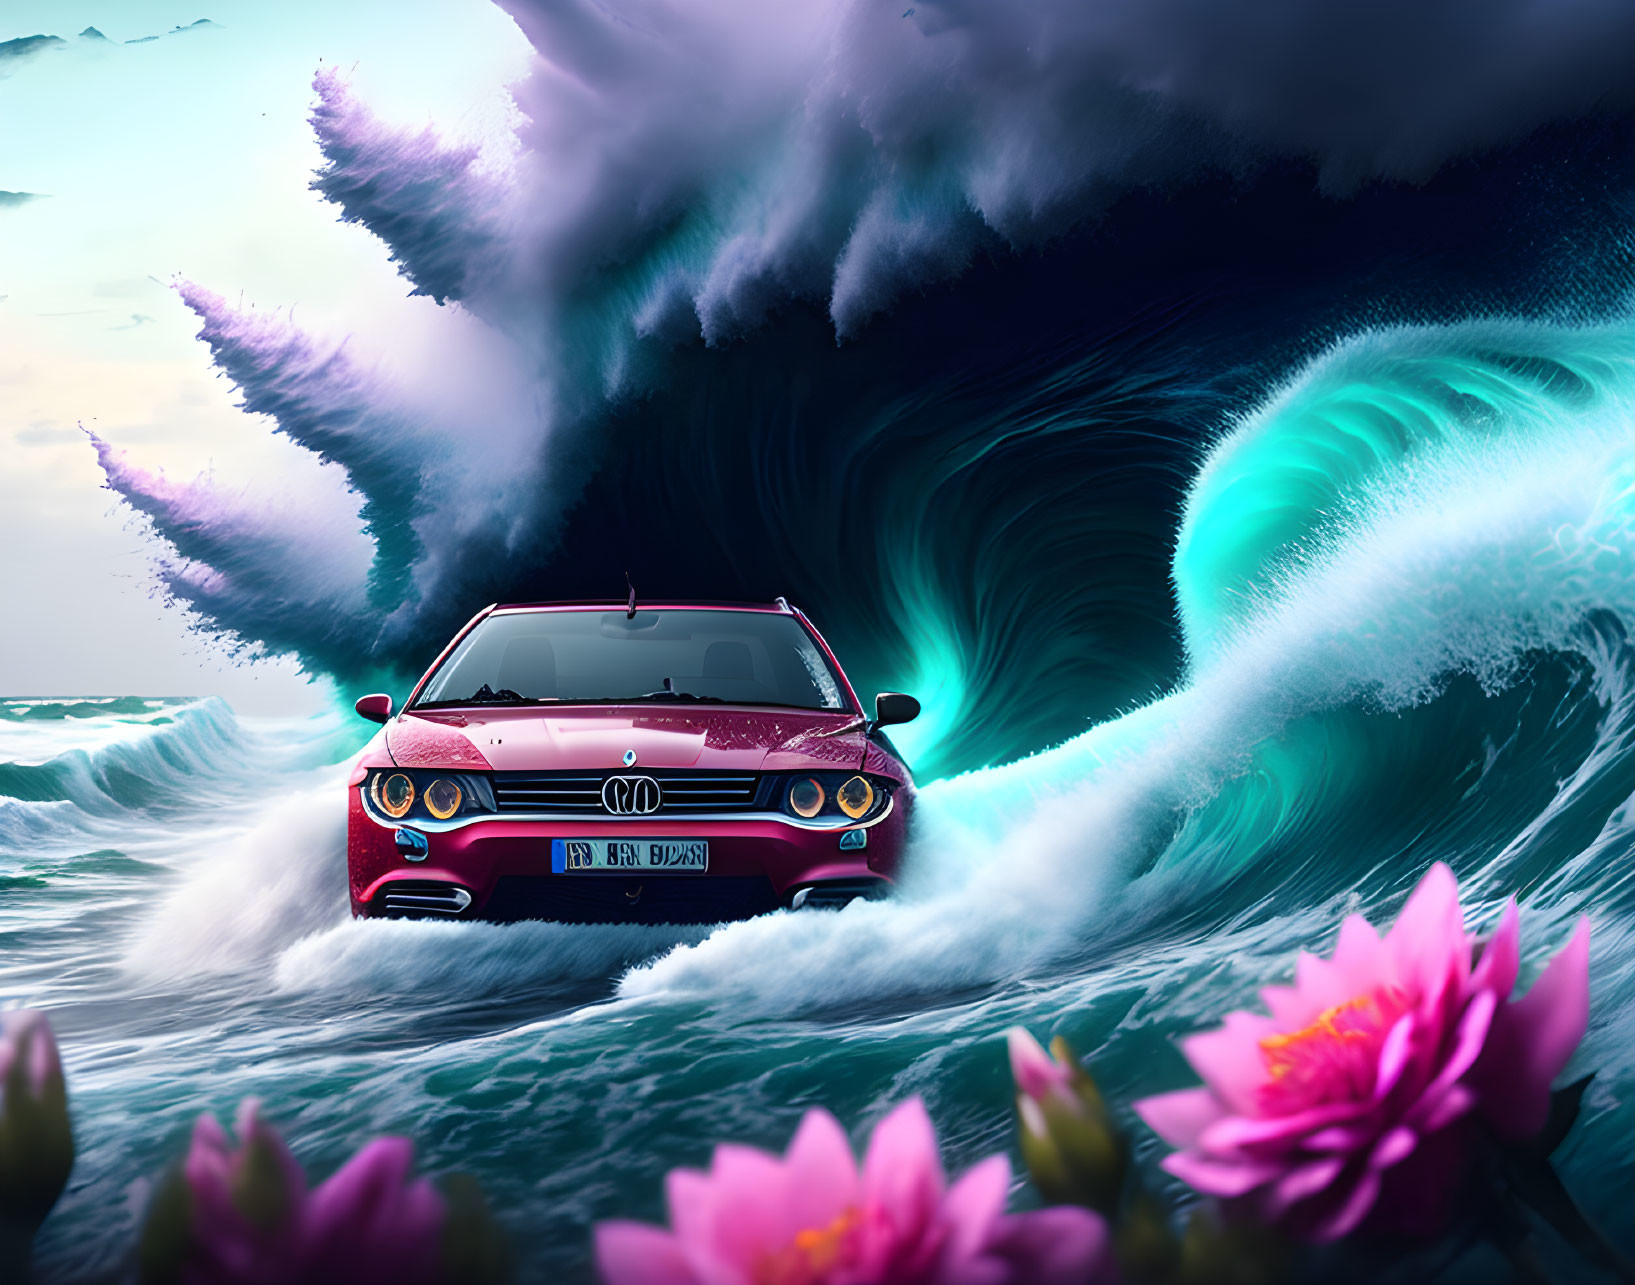 Red Car Speeding Through Fantastical Landscape with Turquoise Waves and Pink Flowers